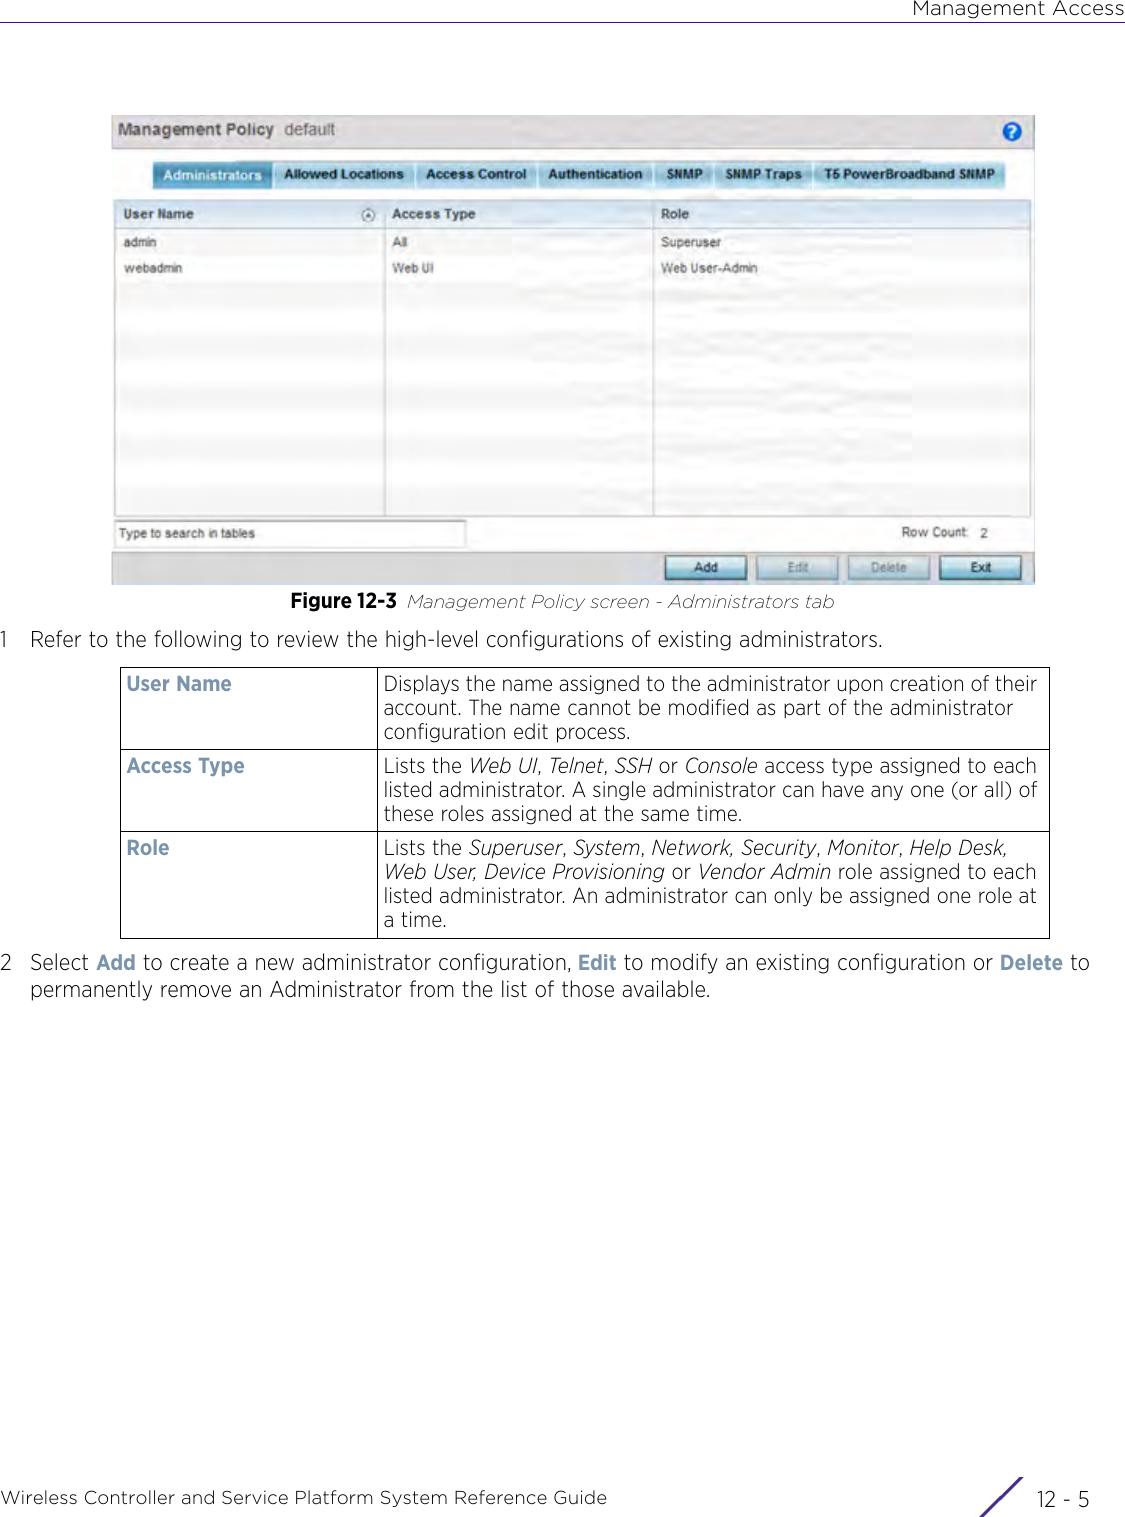 Management AccessWireless Controller and Service Platform System Reference Guide 12 - 5Figure 12-3 Management Policy screen - Administrators tab1 Refer to the following to review the high-level configurations of existing administrators.2Select Add to create a new administrator configuration, Edit to modify an existing configuration or Delete to permanently remove an Administrator from the list of those available. User Name Displays the name assigned to the administrator upon creation of their account. The name cannot be modified as part of the administrator configuration edit process.Access Type Lists the Web UI, Telnet, SSH or Console access type assigned to each listed administrator. A single administrator can have any one (or all) of these roles assigned at the same time. Role Lists the Superuser, System, Network, Security, Monitor, Help Desk, Web User, Device Provisioning or Vendor Admin role assigned to each listed administrator. An administrator can only be assigned one role at a time.